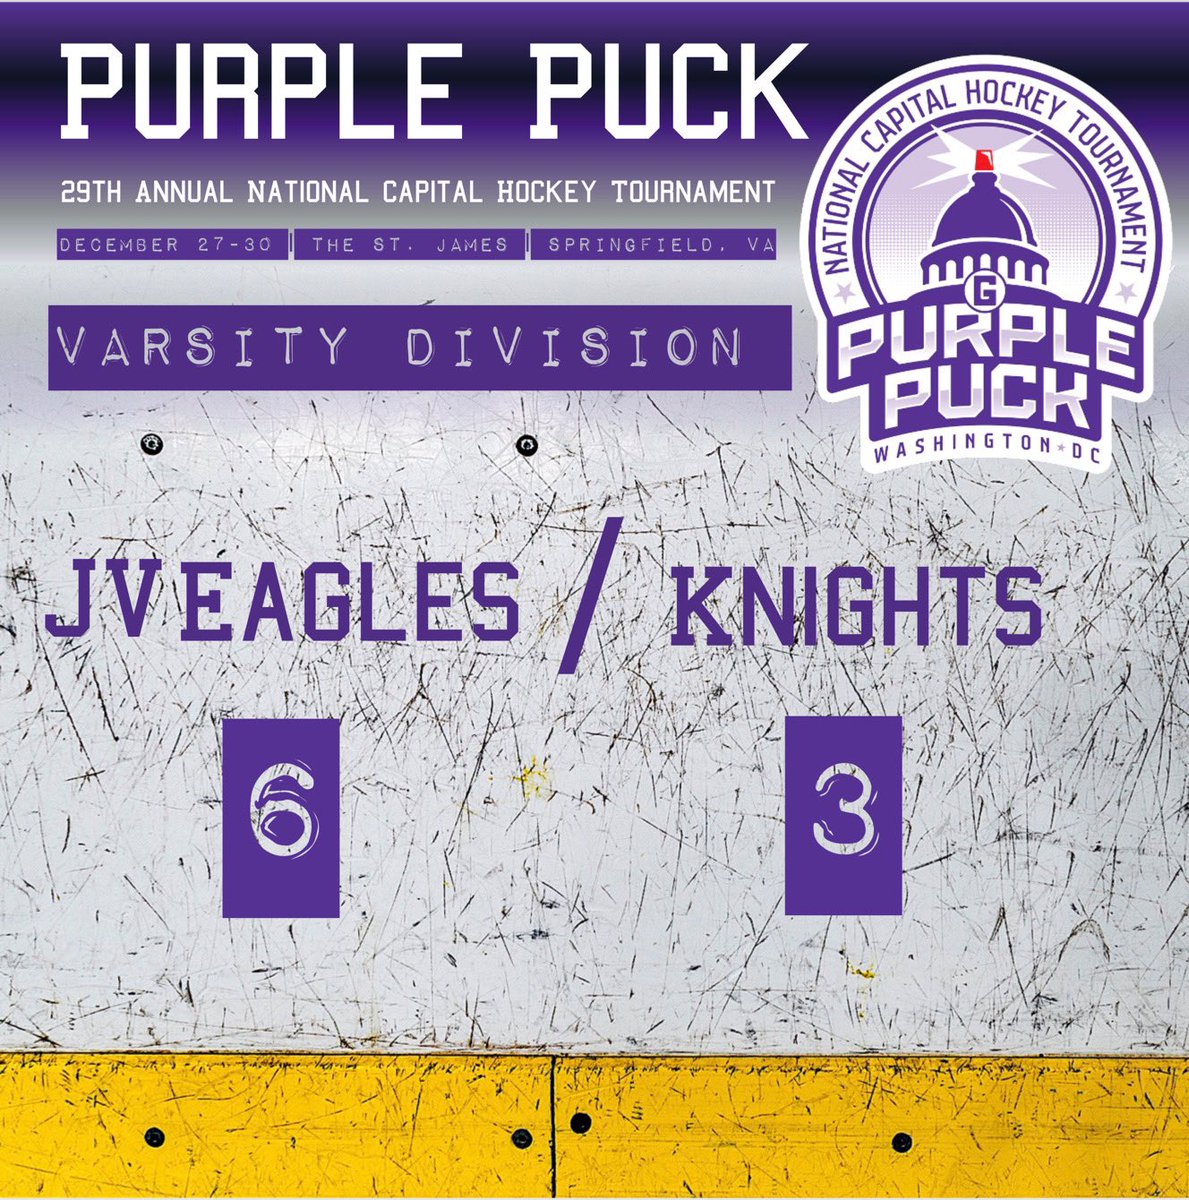 JV Eagles beat Knights 6-3in the Varsity Division